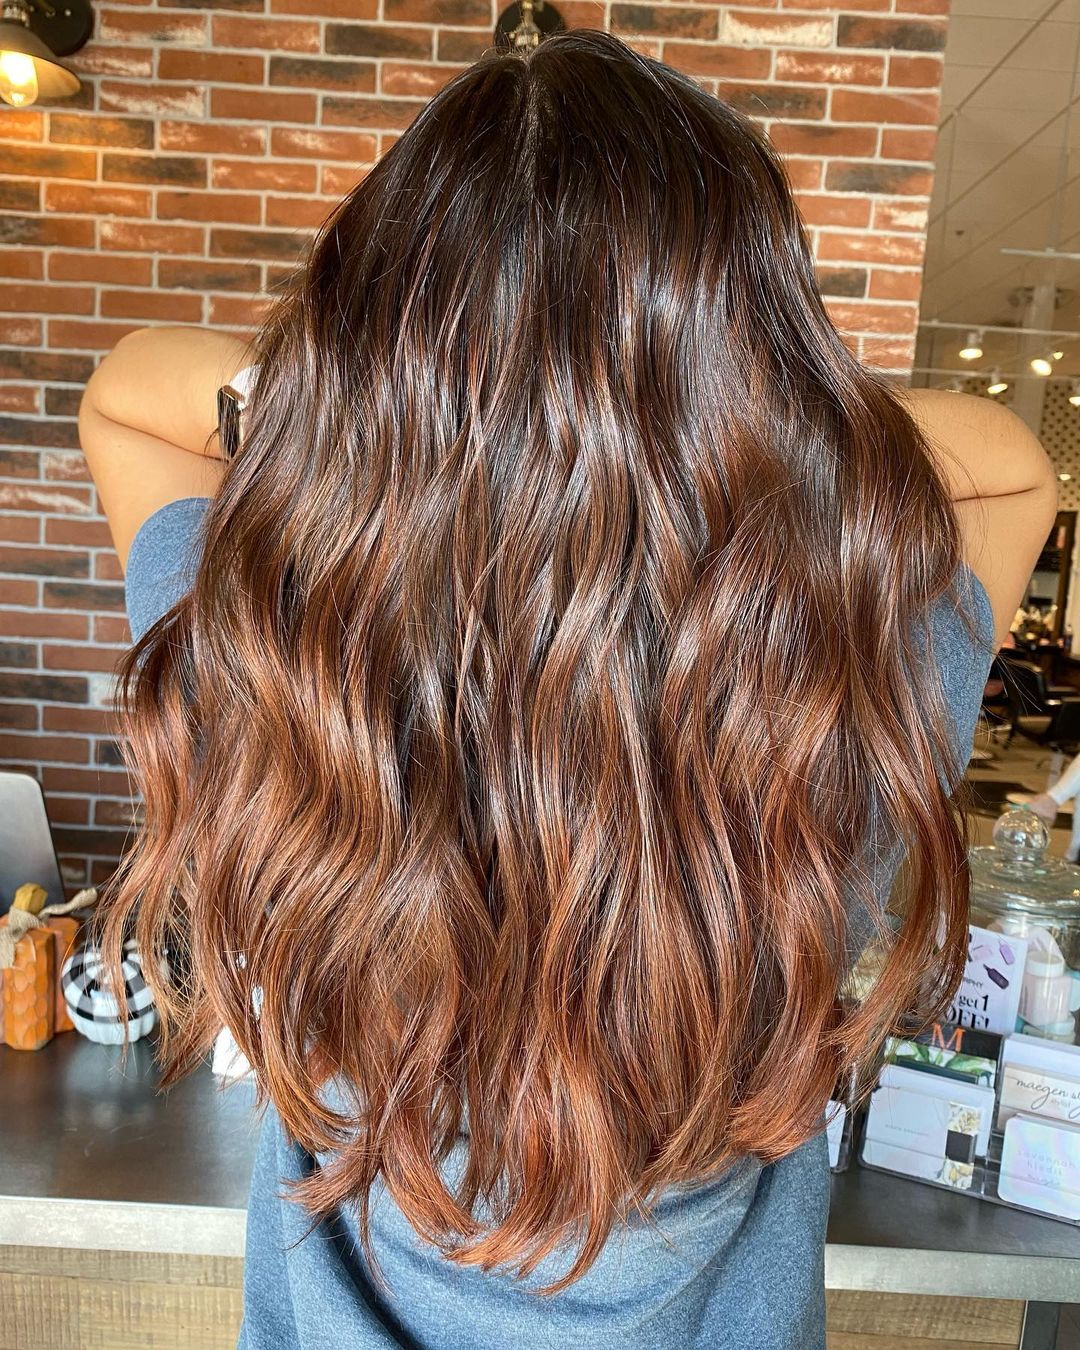 61 Stunning Brown Balayage Hair Color Ideas You Don't Want to Miss